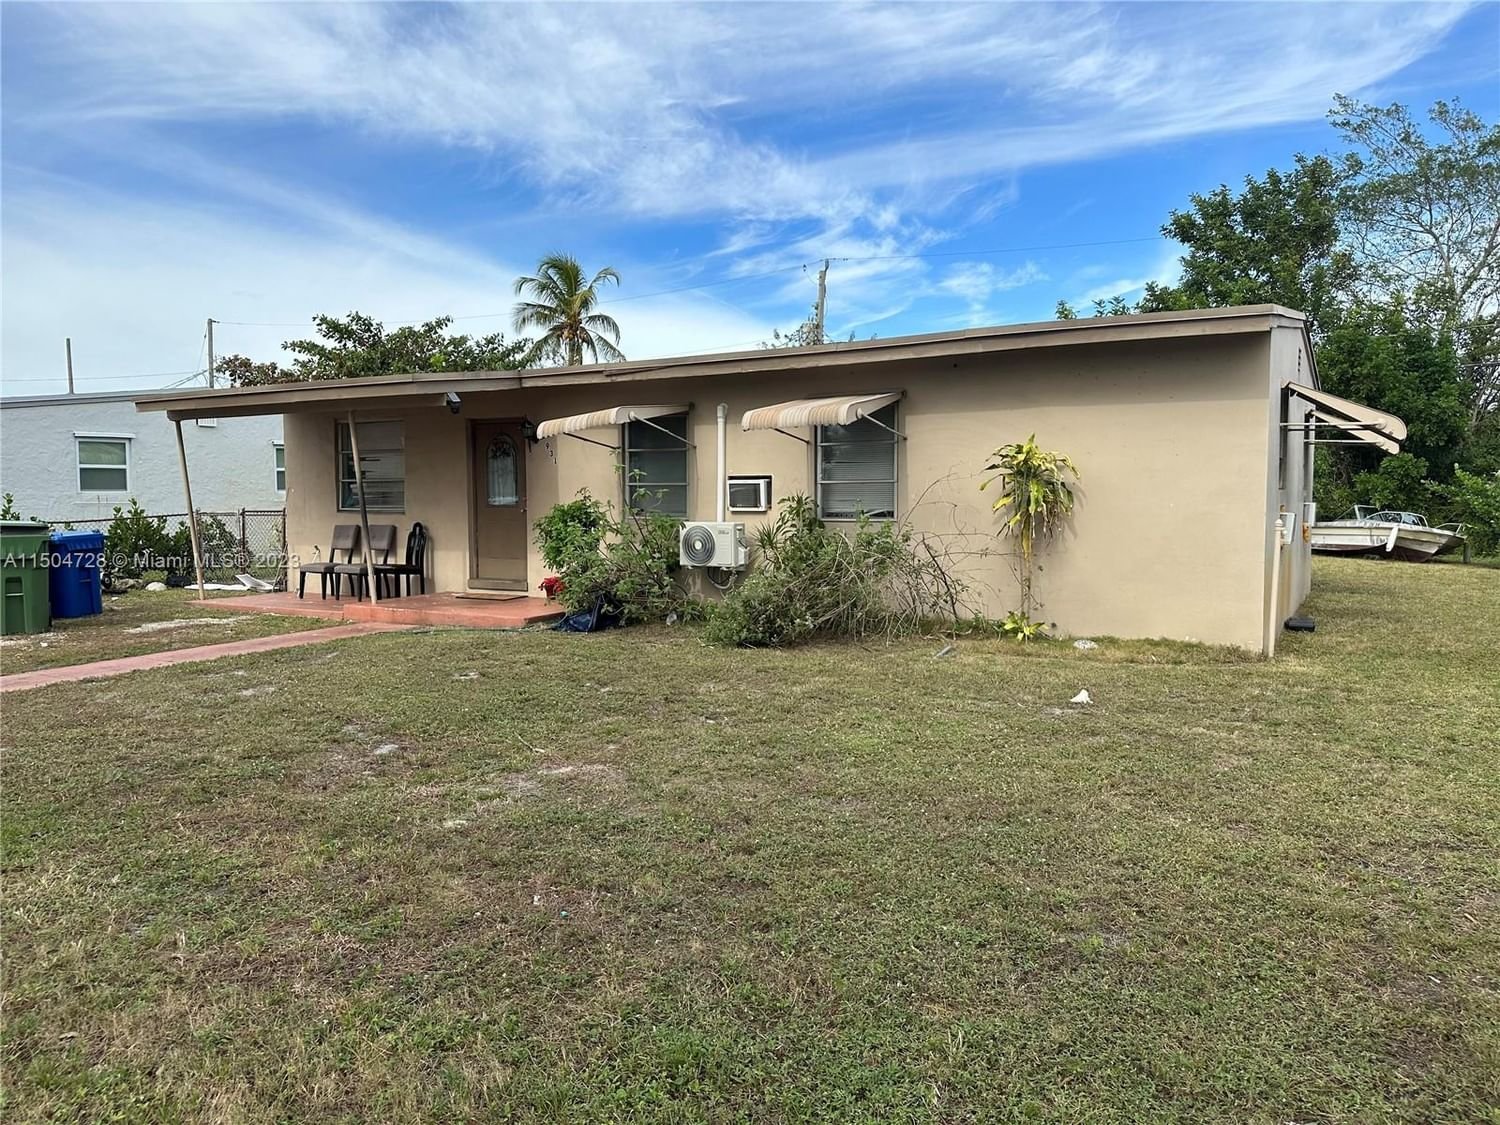 Real estate property located at 931 Chateau Park Dr, Broward County, LAUDERDALE MANORS ADD, Fort Lauderdale, FL